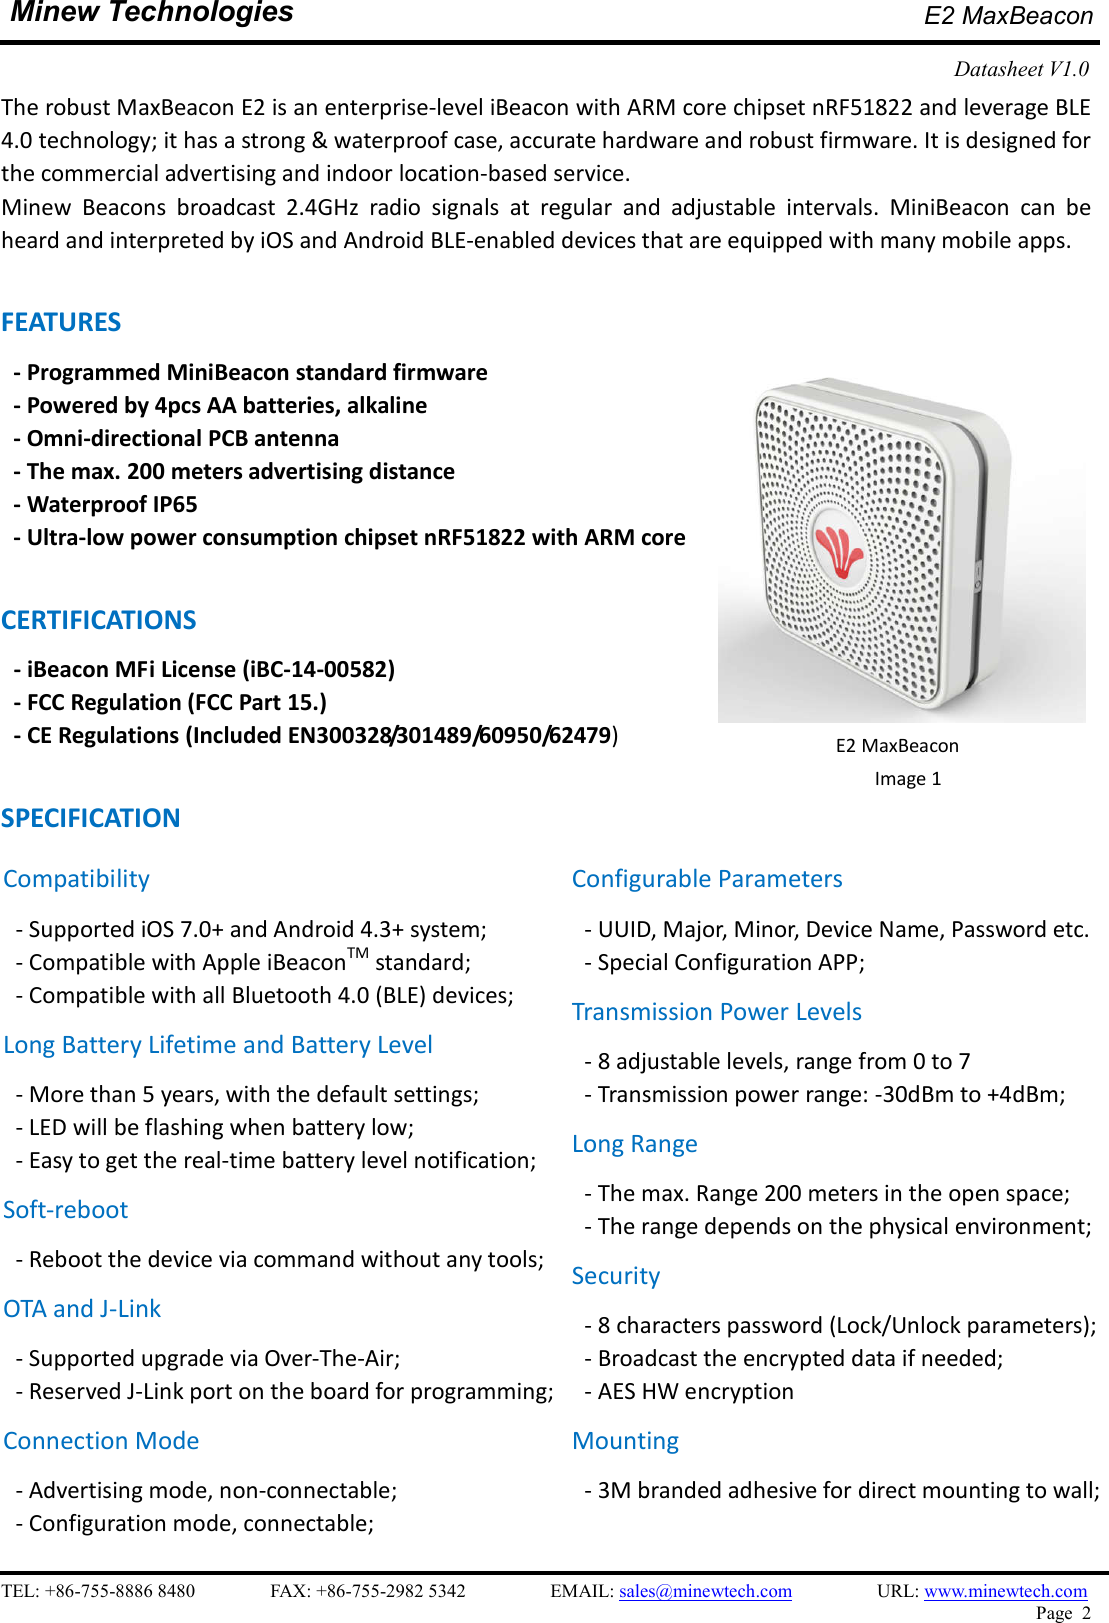    TEL: +86-755-8886 8480                FAX: +86-755-2982 5342                  EMAIL: sales@minewtech.com                  URL: www.minewtech.com Page  2  Minew Technologies E2 MaxBeacon   Datasheet V1.0    The robust MaxBeacon E2 is an enterprise-level iBeacon with ARM core chipset nRF51822 and leverage BLE 4.0 technology; it has a strong &amp; waterproof case, accurate hardware and robust firmware. It is designed for the commercial advertising and indoor location-based service. Minew  Beacons  broadcast  2.4GHz  radio  signals  at  regular  and  adjustable  intervals.  MiniBeacon  can  be heard and interpreted by iOS and Android BLE-enabled devices that are equipped with many mobile apps.  FEATURES - Programmed MiniBeacon standard firmware   - Powered by 4pcs AA batteries, alkaline - Omni-directional PCB antenna - The max. 200 meters advertising distance - Waterproof IP65 - Ultra-low power consumption chipset nRF51822 with ARM core  CERTIFICATIONS - iBeacon MFi License (iBC-14-00582)   - FCC Regulation (FCC Part 15.) - CE Regulations (Included EN300328/301489/60950/62479)  SPECIFICATION                                                     E2 MaxBeacon Image 1   Compatibility - Supported iOS 7.0+ and Android 4.3+ system; - Compatible with Apple iBeaconTM standard;   - Compatible with all Bluetooth 4.0 (BLE) devices; Long Battery Lifetime and Battery Level - More than 5 years, with the default settings; - LED will be flashing when battery low; - Easy to get the real-time battery level notification; Soft-reboot   - Reboot the device via command without any tools;   OTA and J-Link - Supported upgrade via Over-The-Air;   - Reserved J-Link port on the board for programming;   Connection Mode - Advertising mode, non-connectable;   - Configuration mode, connectable;   Configurable Parameters - UUID, Major, Minor, Device Name, Password etc. - Special Configuration APP; Transmission Power Levels - 8 adjustable levels, range from 0 to 7 - Transmission power range: -30dBm to +4dBm;   Long Range - The max. Range 200 meters in the open space;   - The range depends on the physical environment; Security - 8 characters password (Lock/Unlock parameters);   - Broadcast the encrypted data if needed; - AES HW encryption Mounting - 3M branded adhesive for direct mounting to wall;    